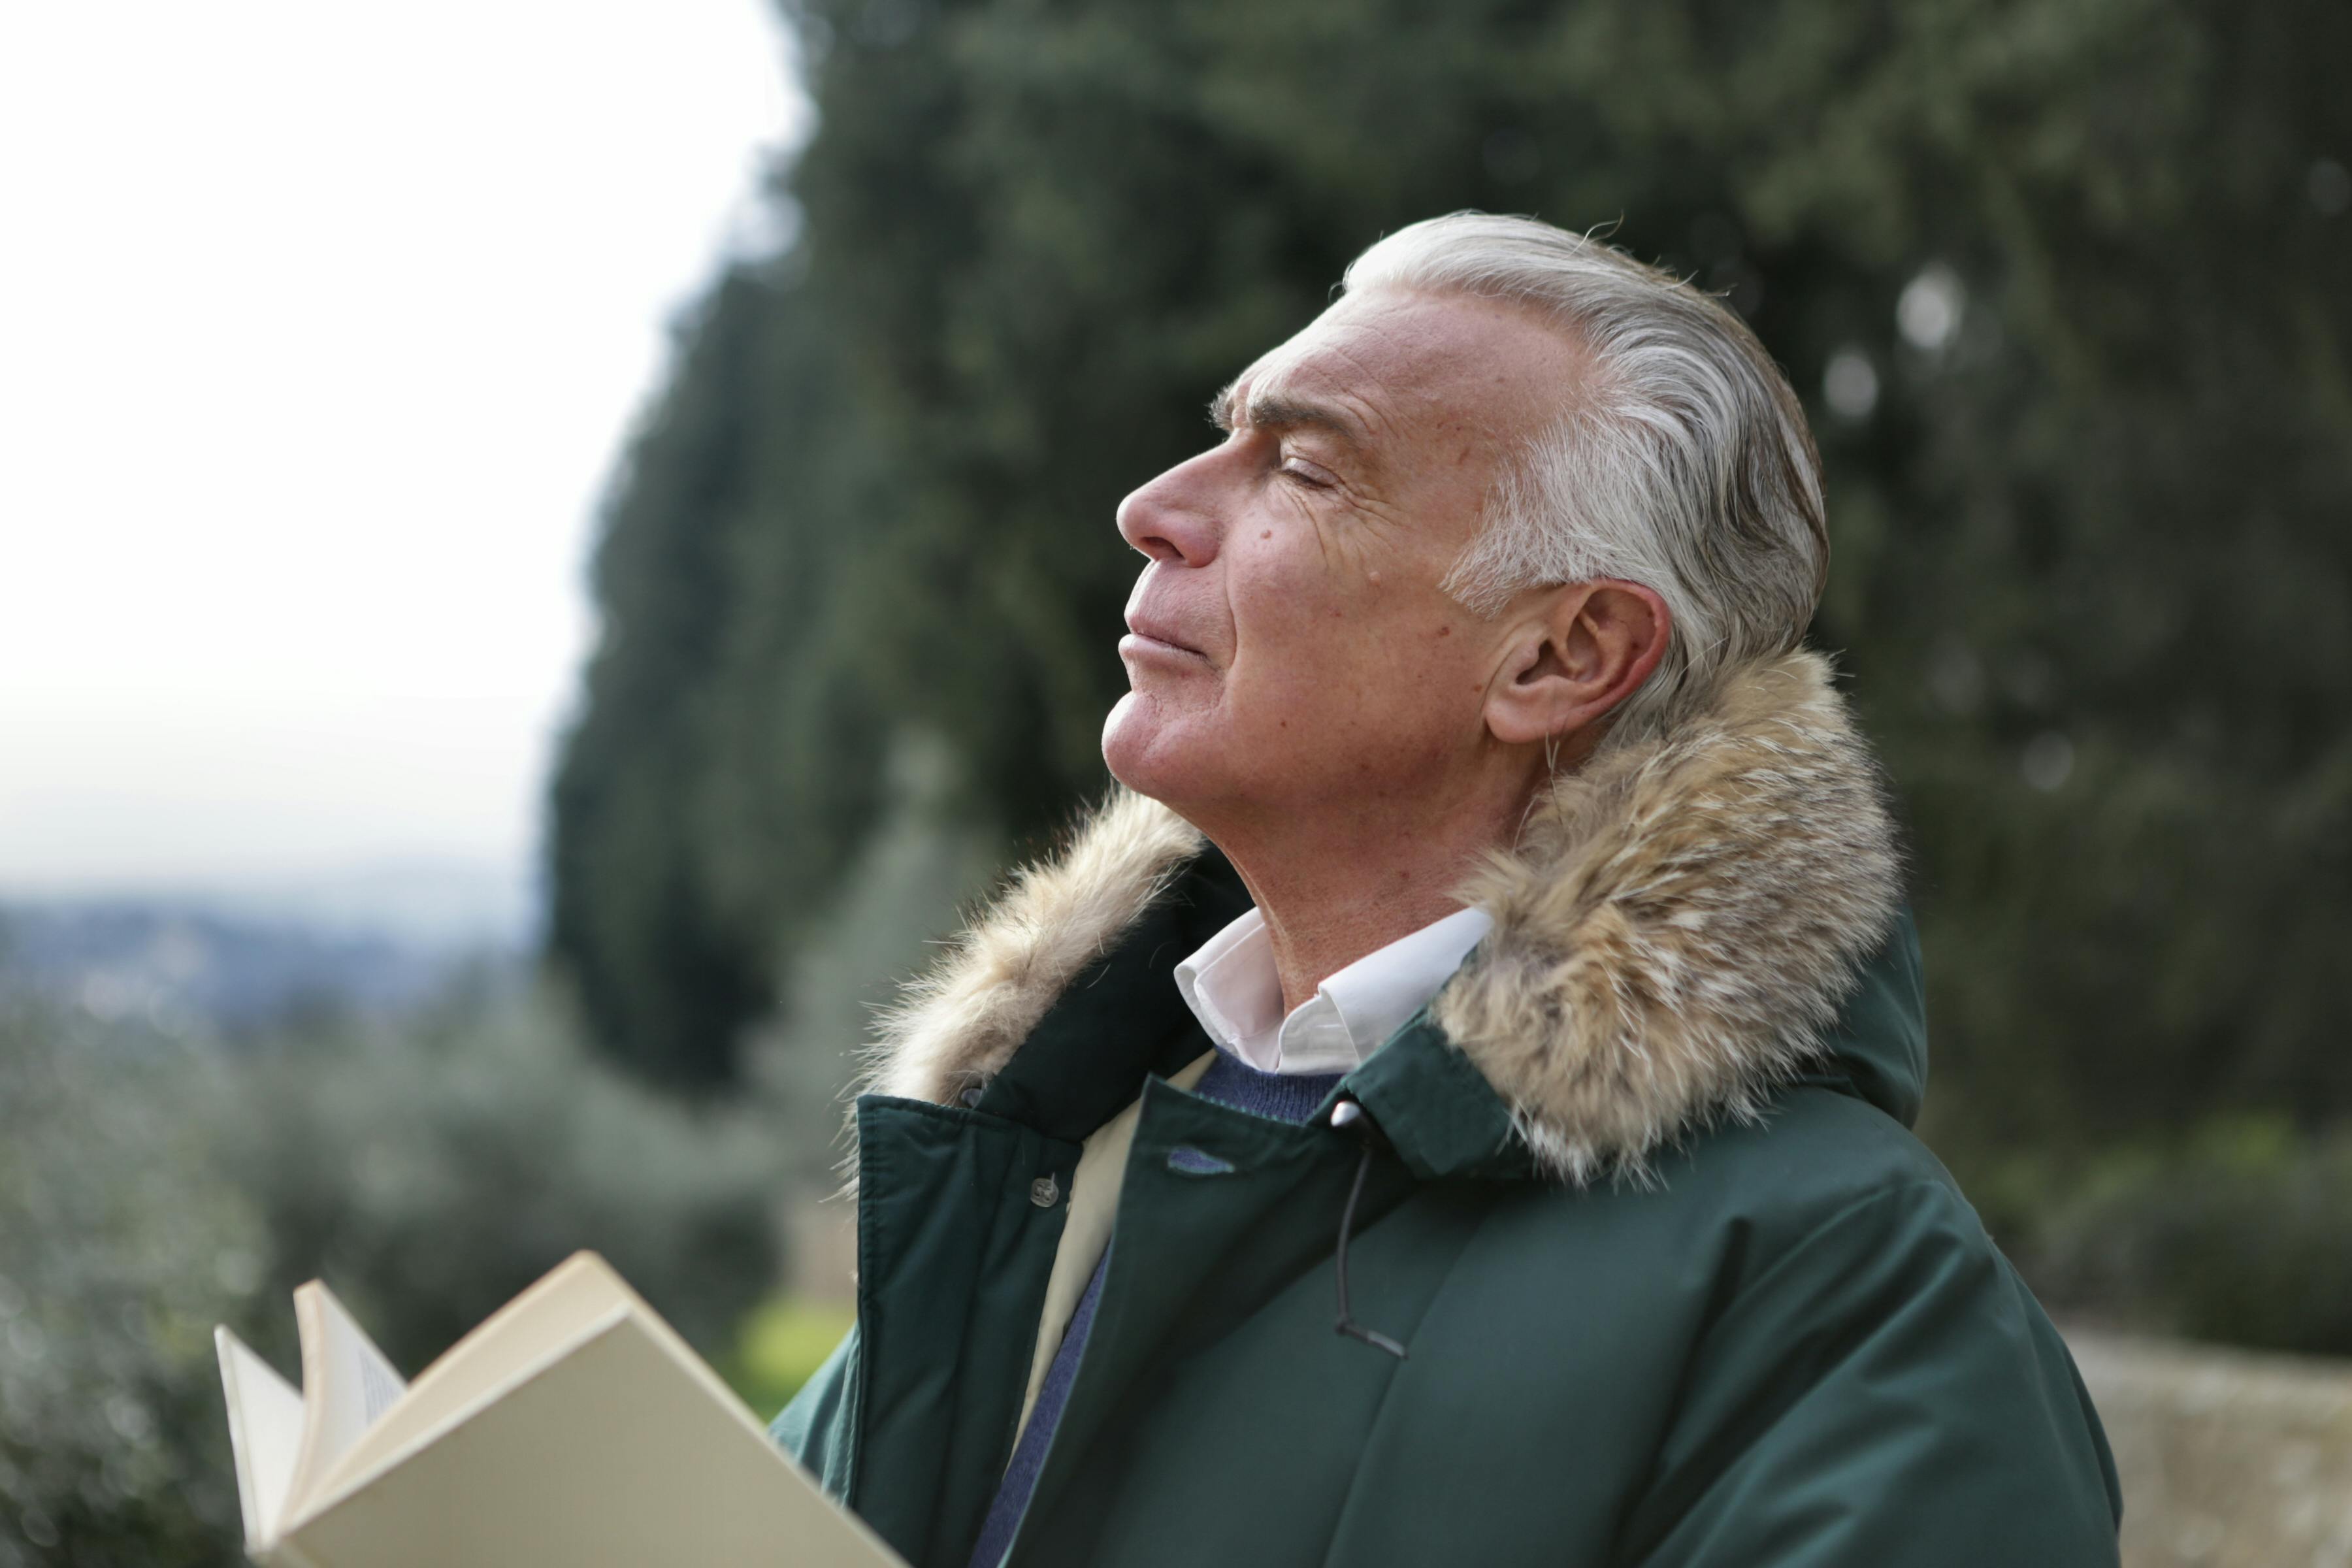 An older man reading a book and inhaling deeply with his eyes closed